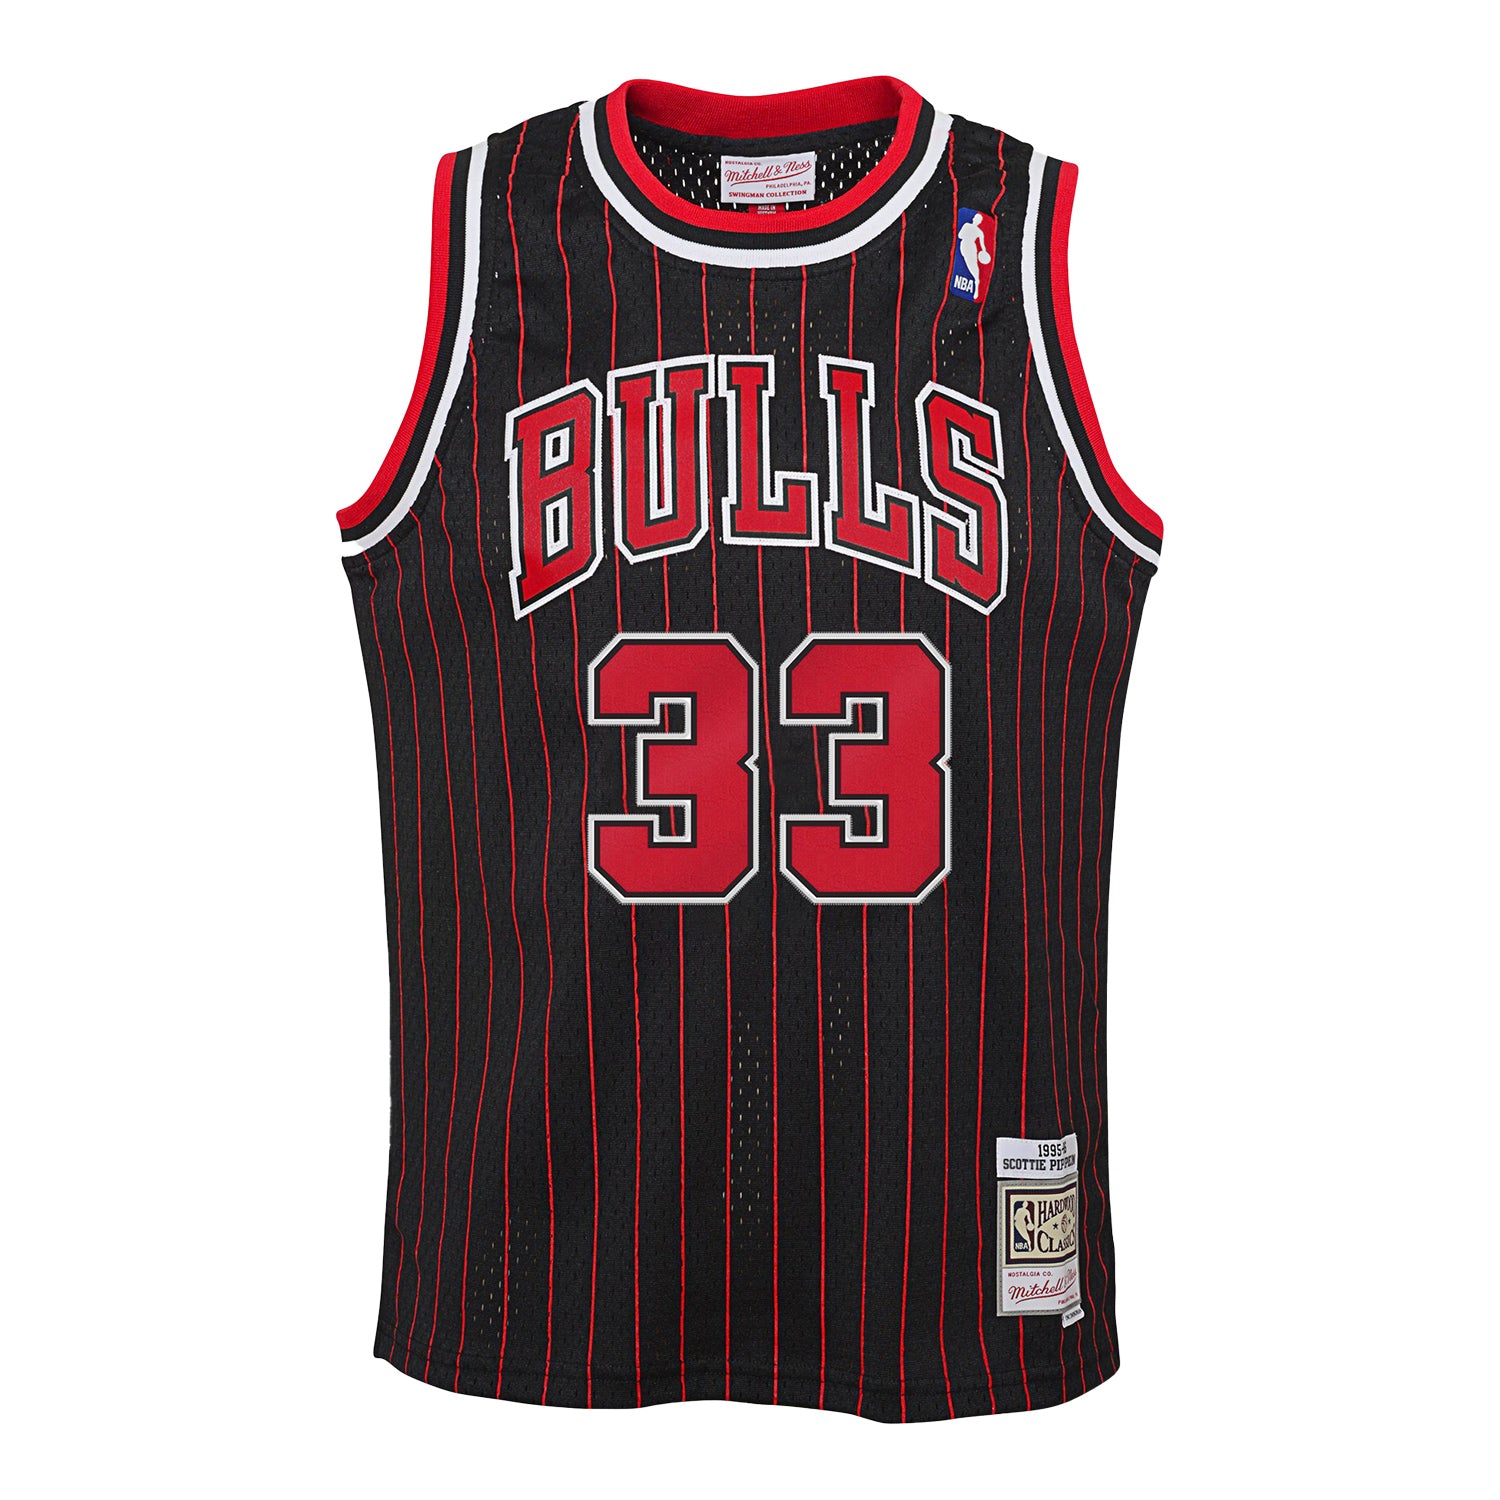 Youth Chicago Bulls Authentic Mitchell & Ness Scottie Pippen 1995-96 Jersey - front  view